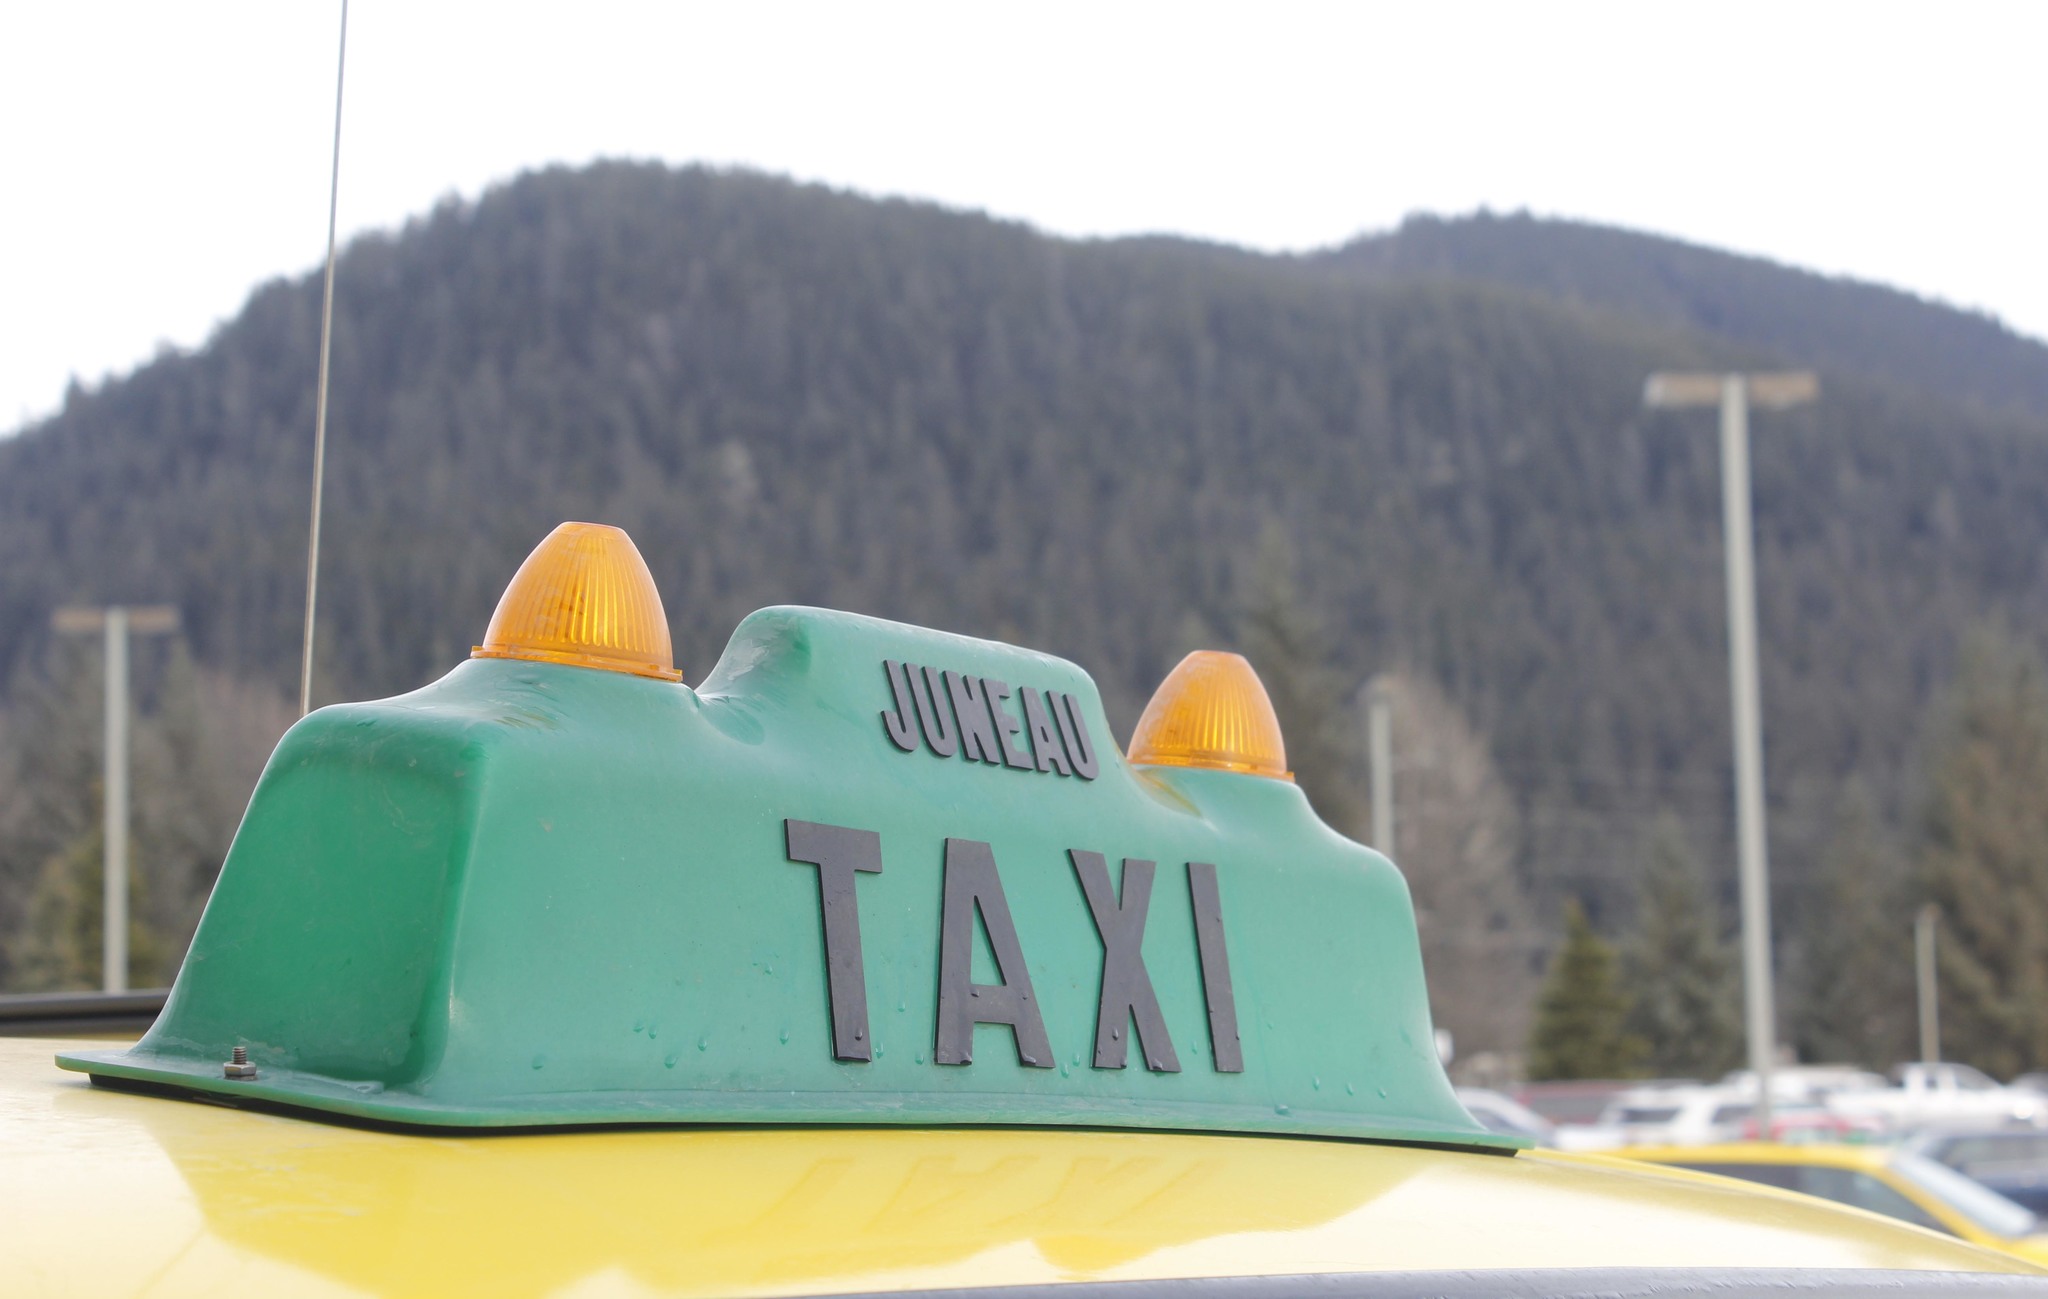 Many locals are skeptical of Uber coming to Juneau, in part to protect the well-being of local taxi companies. (Alex McCarthy | Juneau Empire)